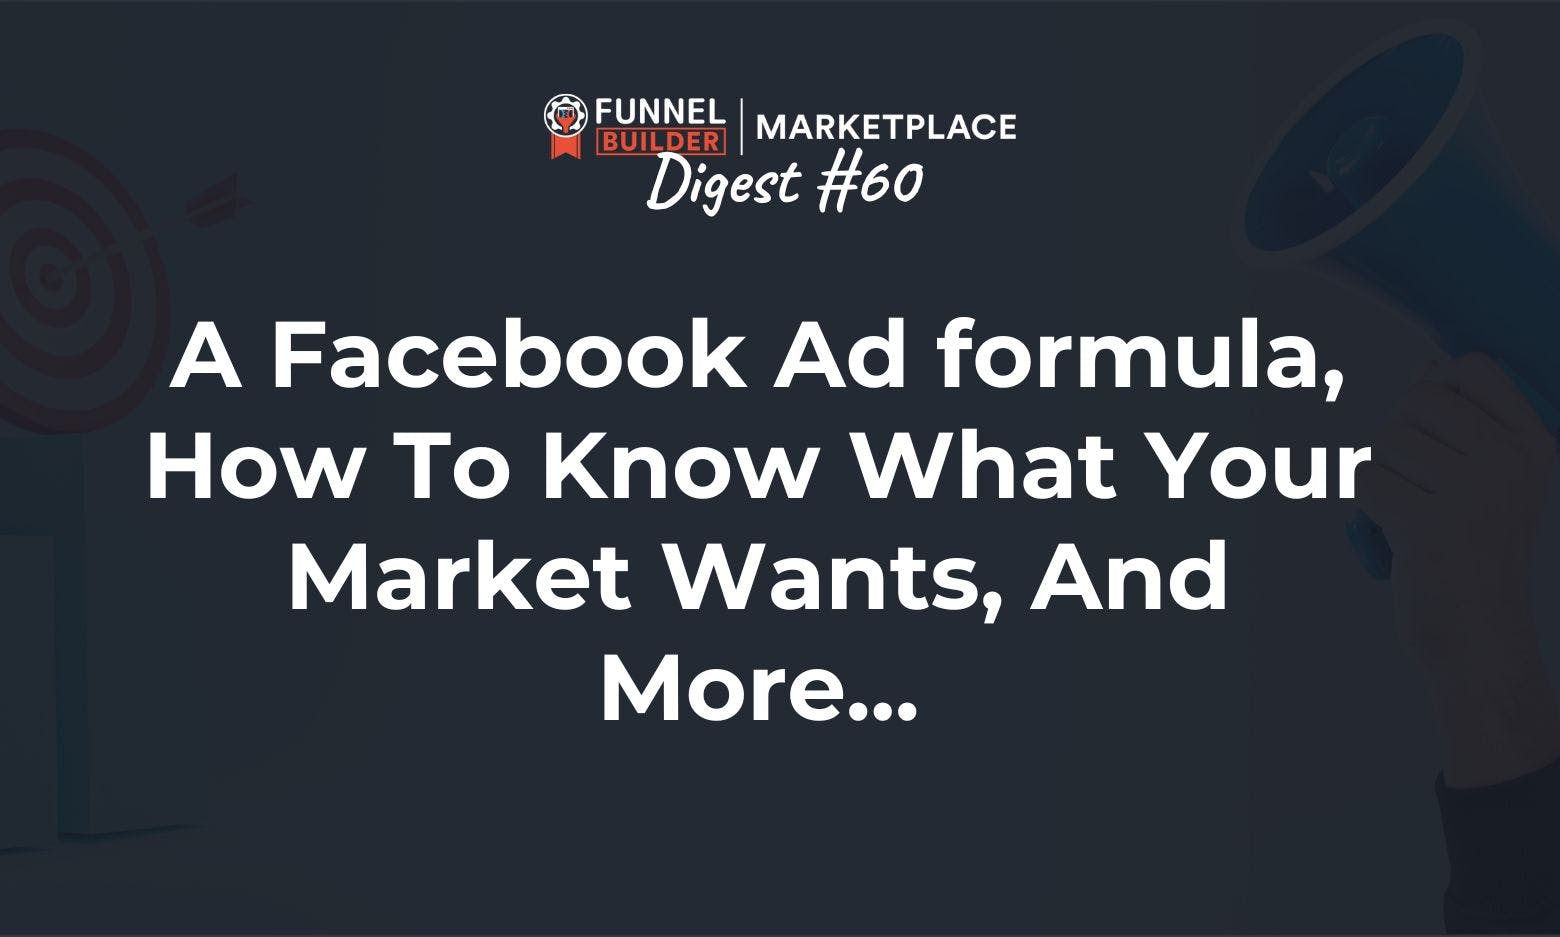 FBM Digest #60: Facebook Ad formula, how to know what your market wants, and more...